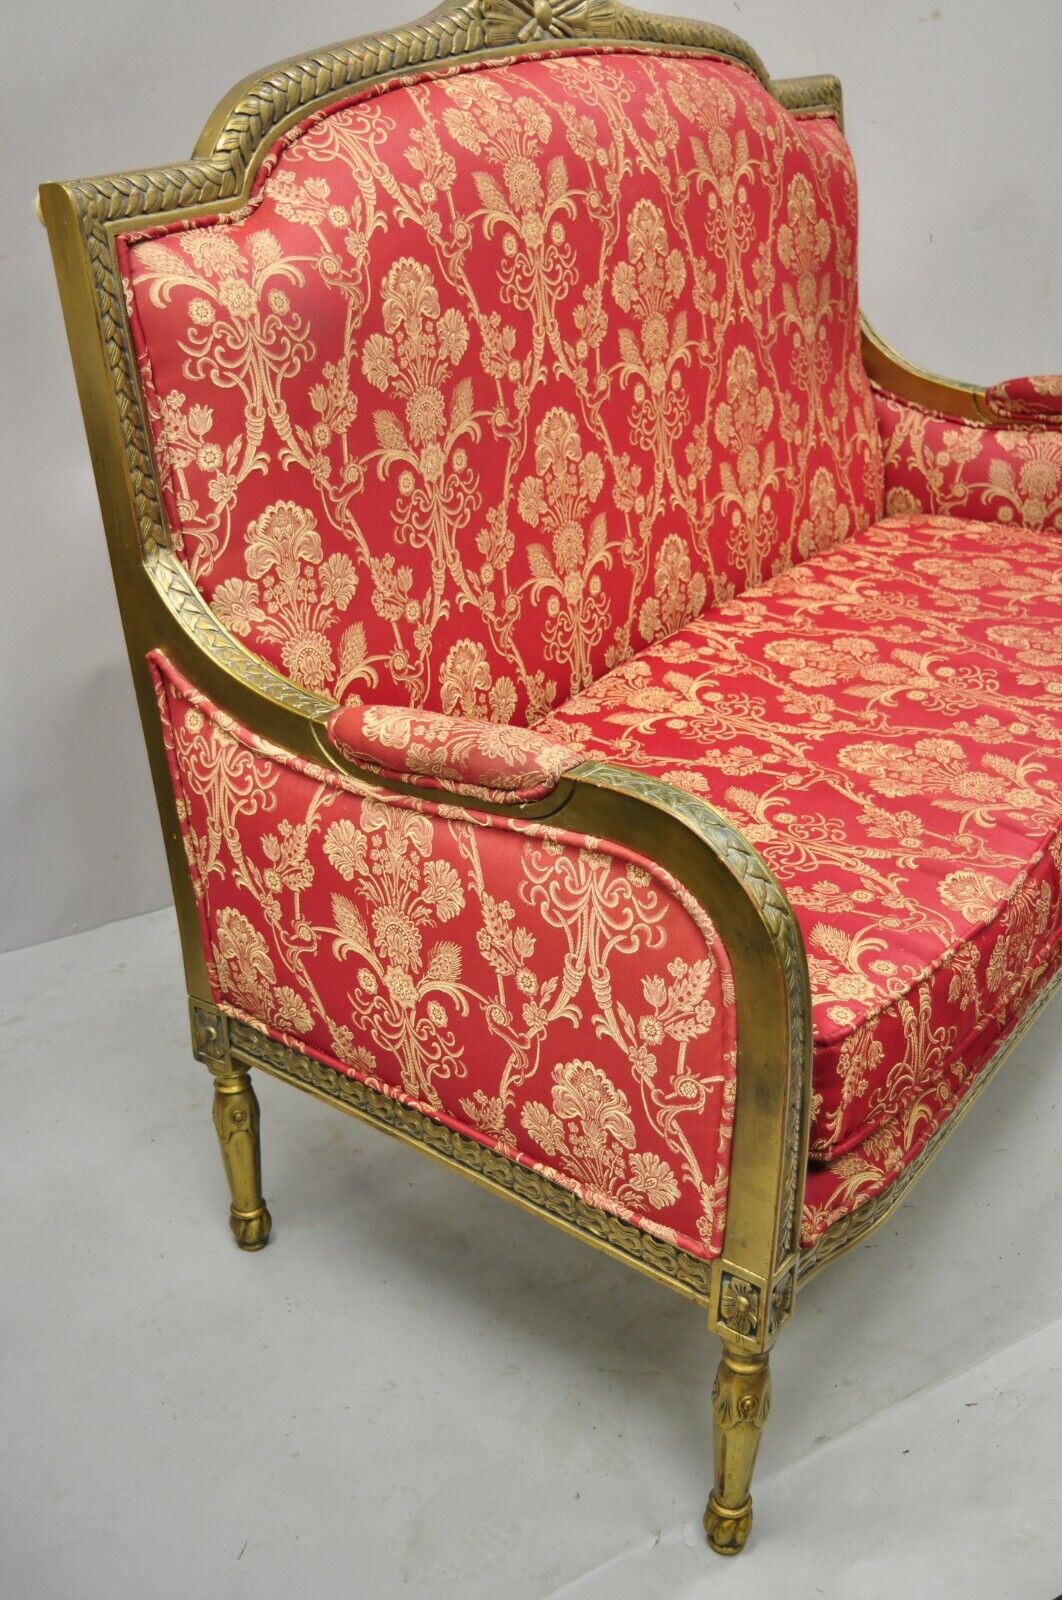 French Louis XVI Style Gold Red Upholstered Settee Sofa Loveseat Decorator Chair